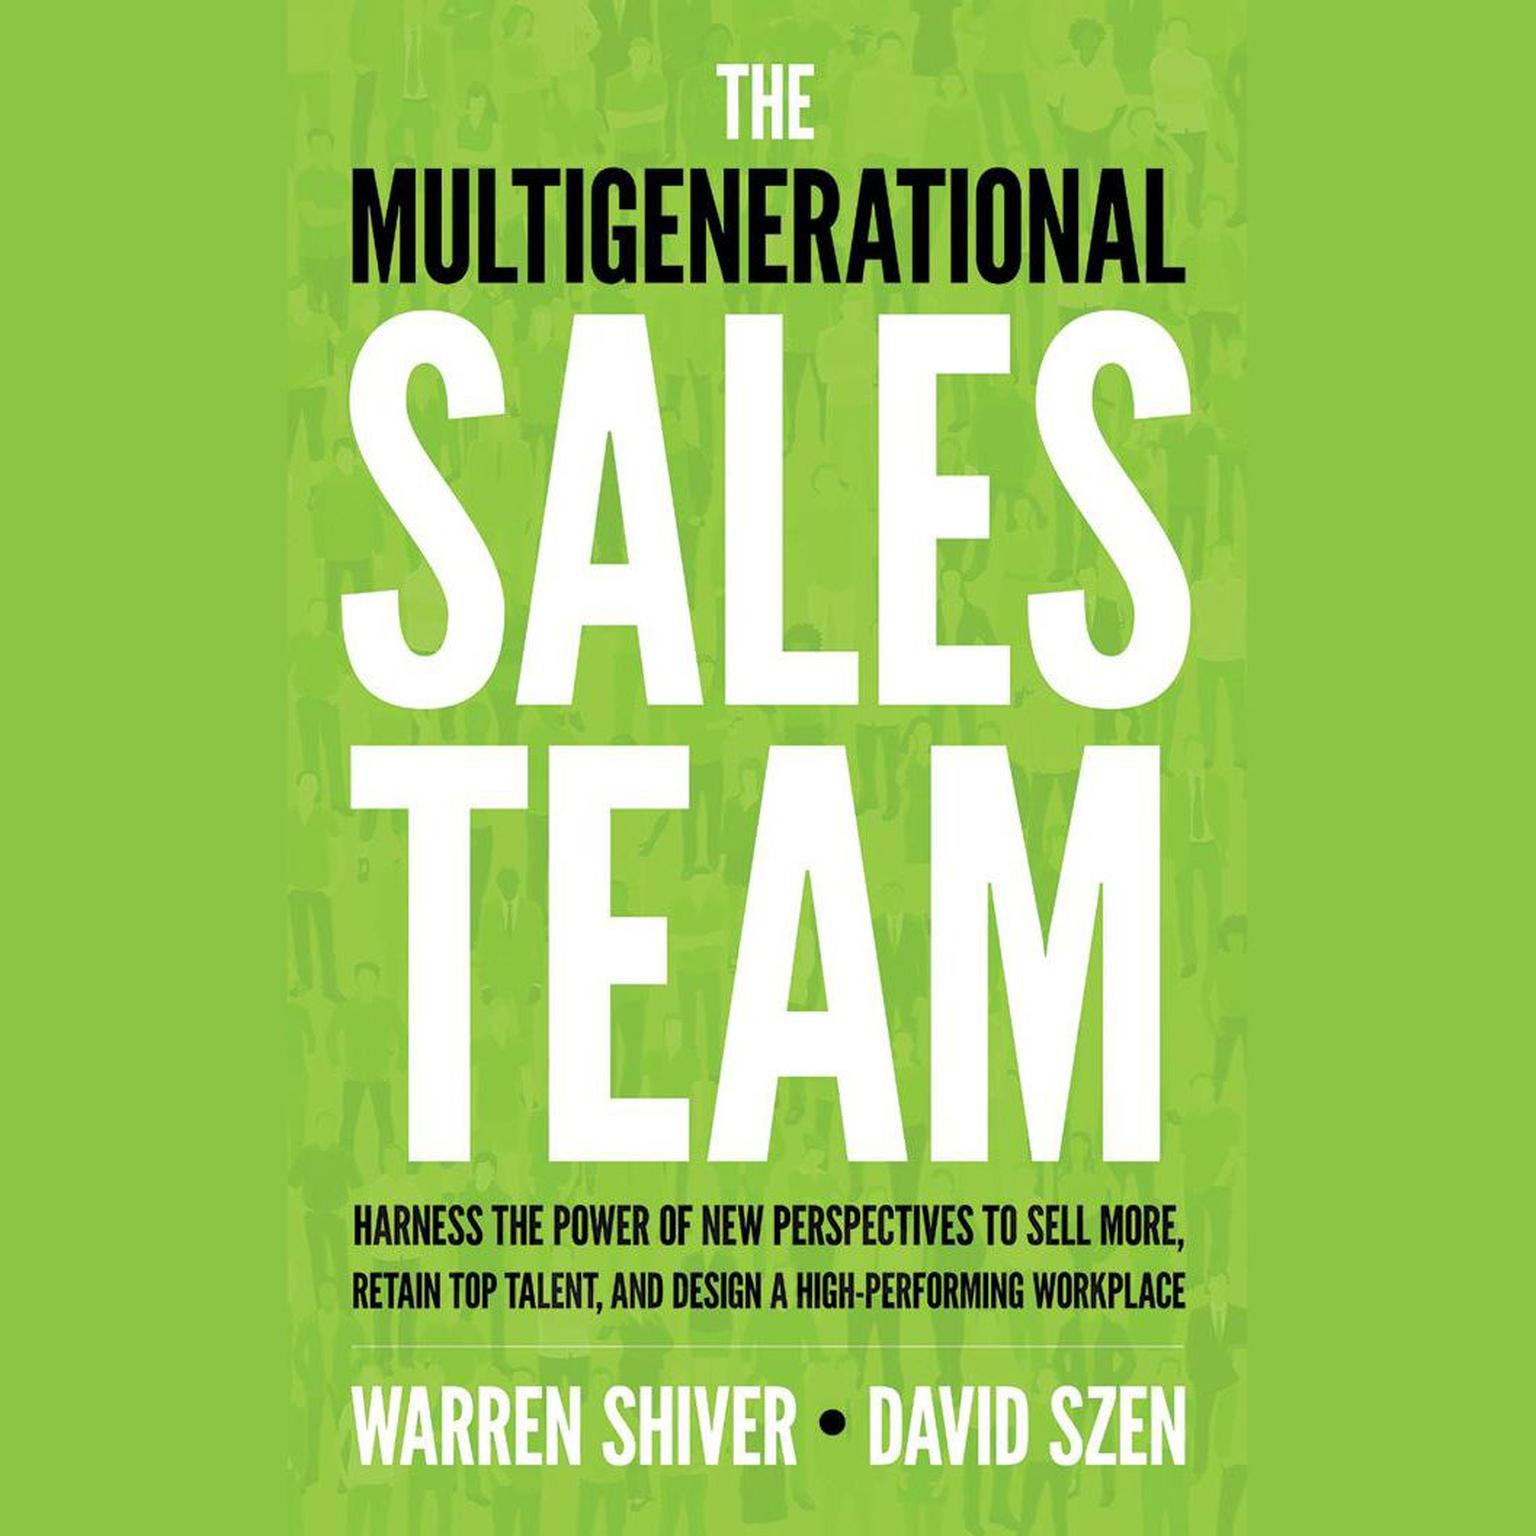 The Multigenerational Sales Team: Harness the Power of New Perspectives to Sell More, Retain Top Talent, and Design a High-Performing Workplace Audiobook, by Warren Shriver